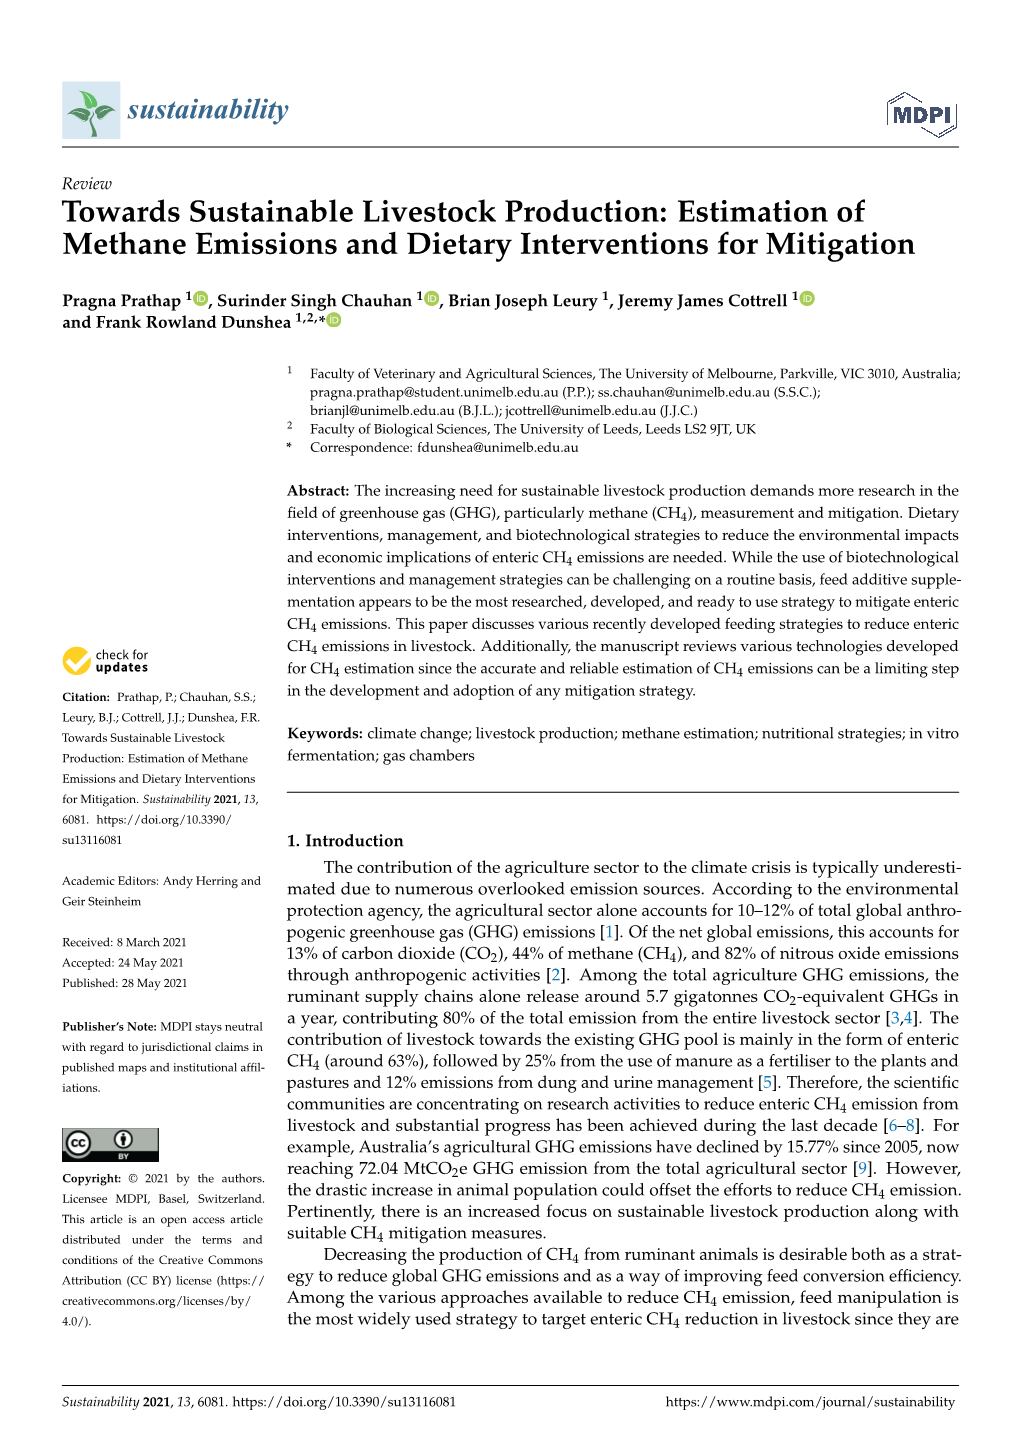 Estimation of Methane Emissions and Dietary Interventions for Mitigation